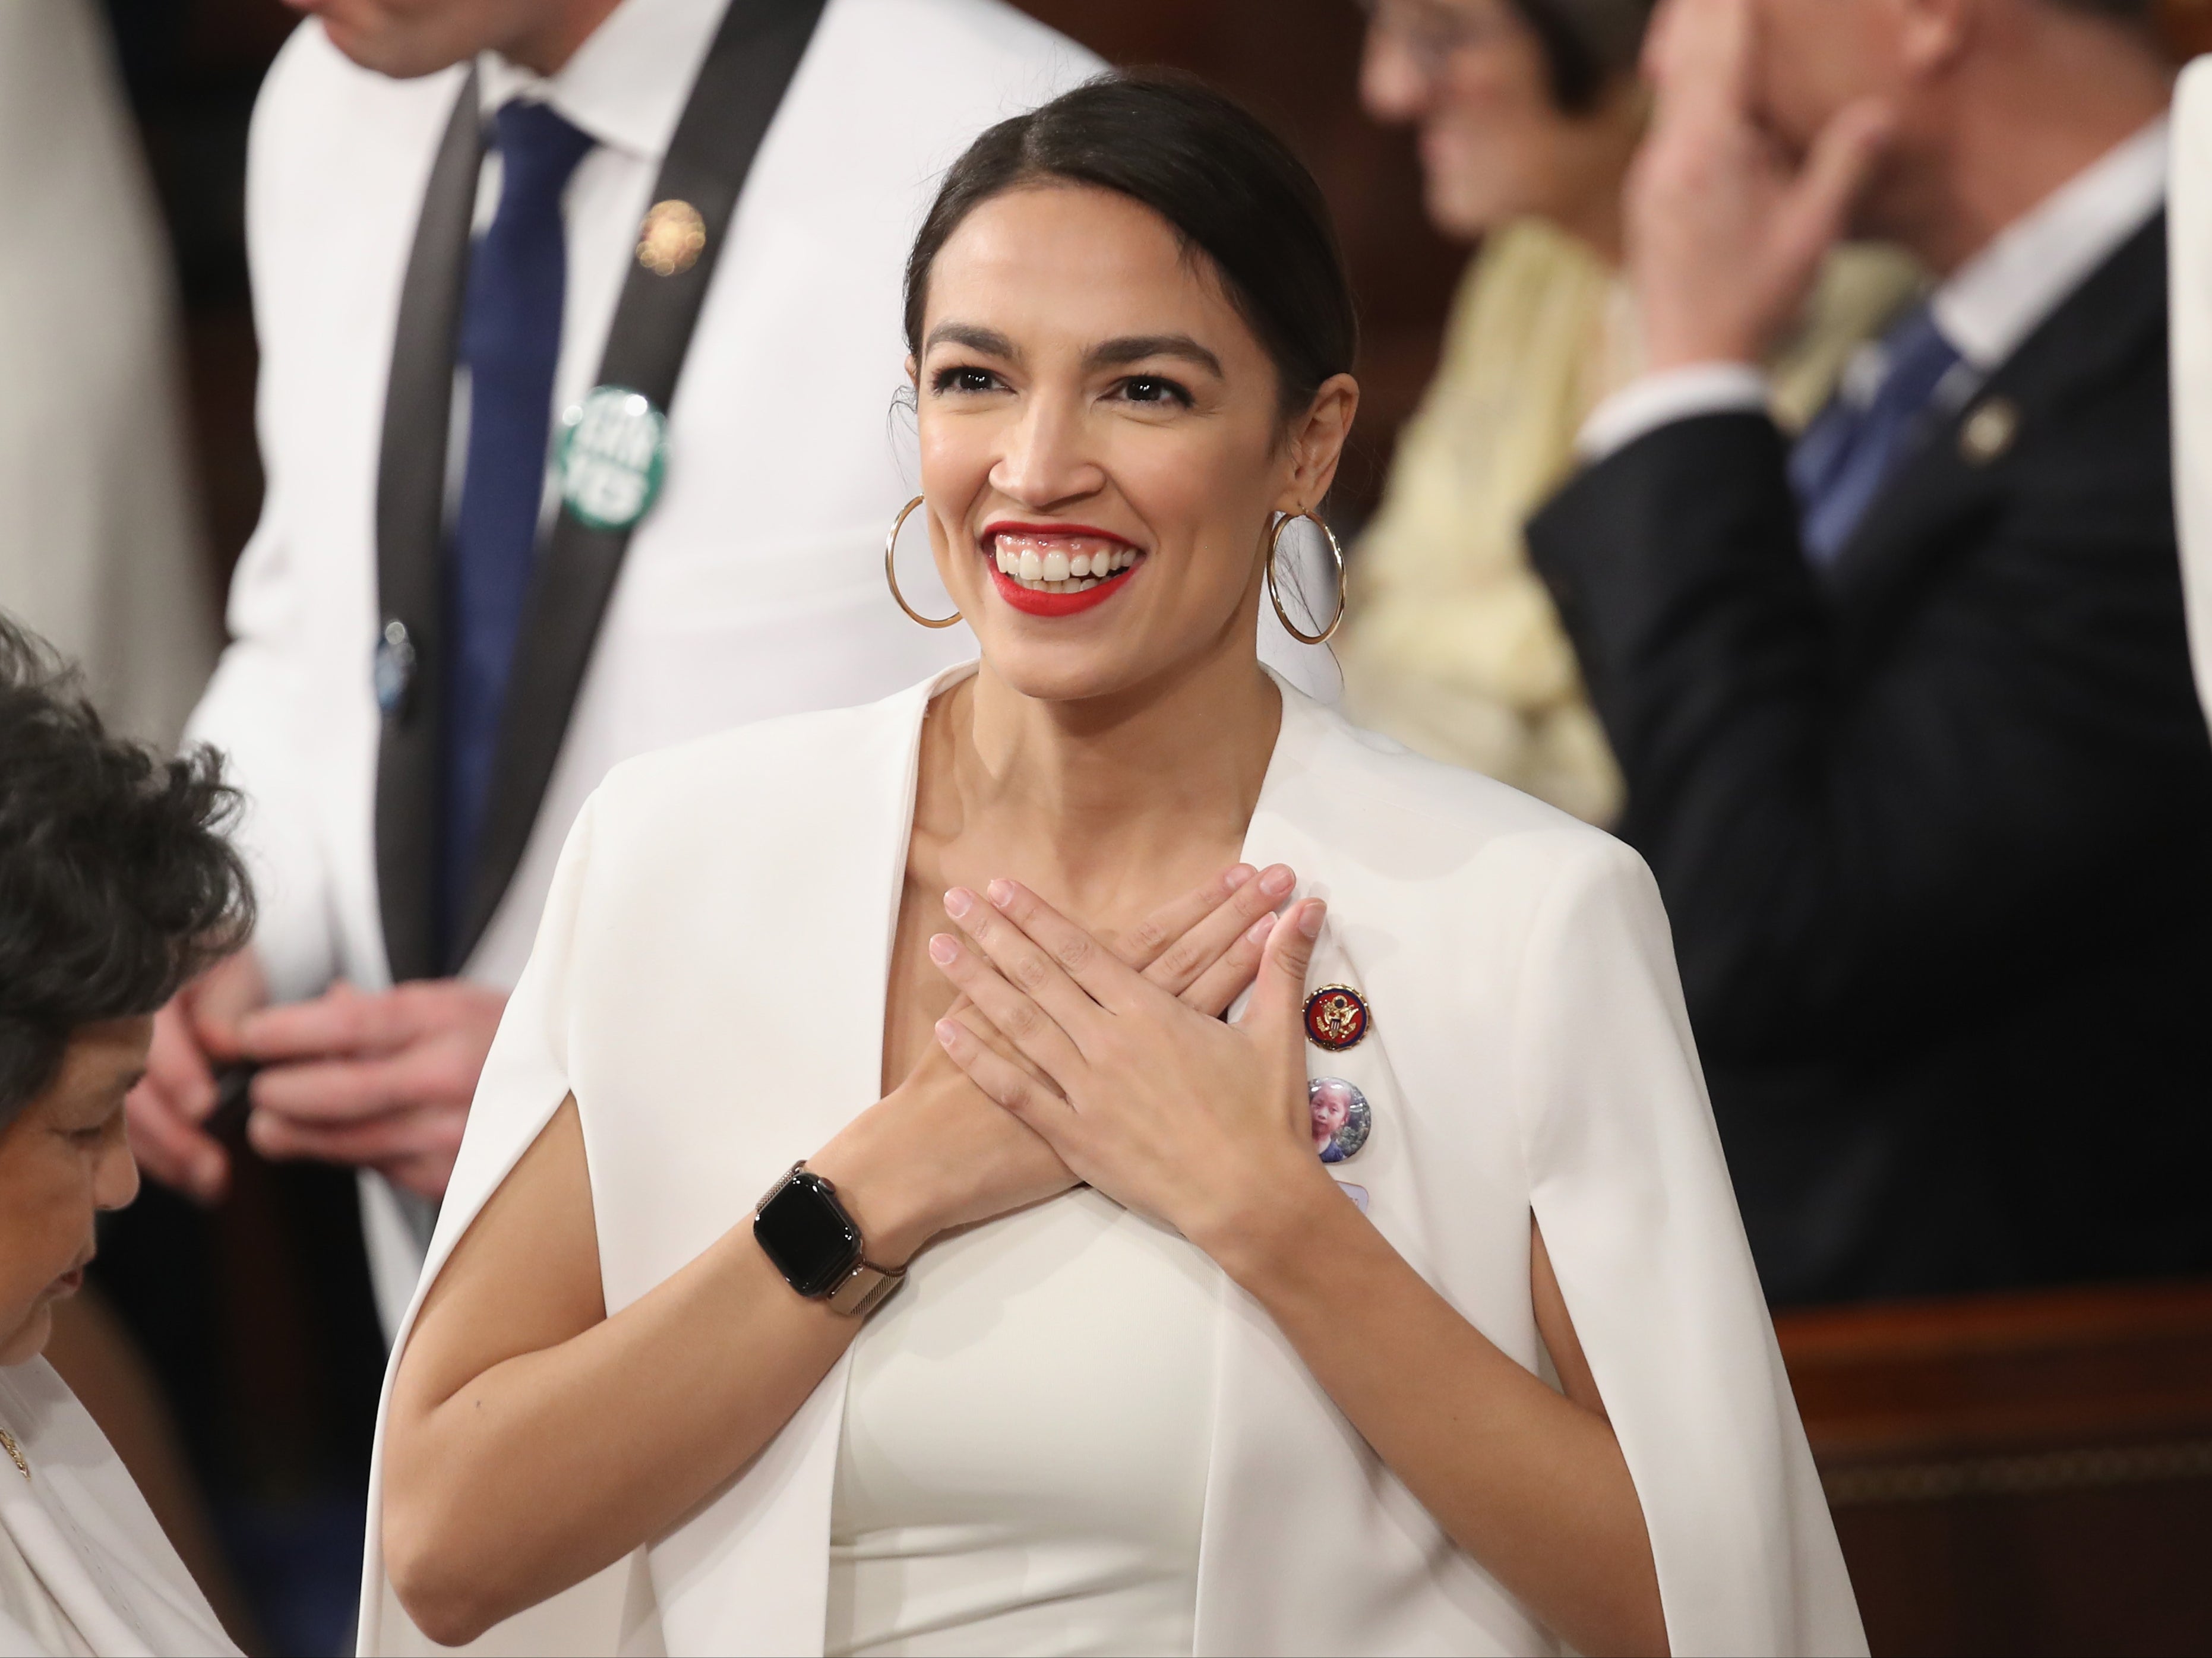 AOC confirms she is engaged